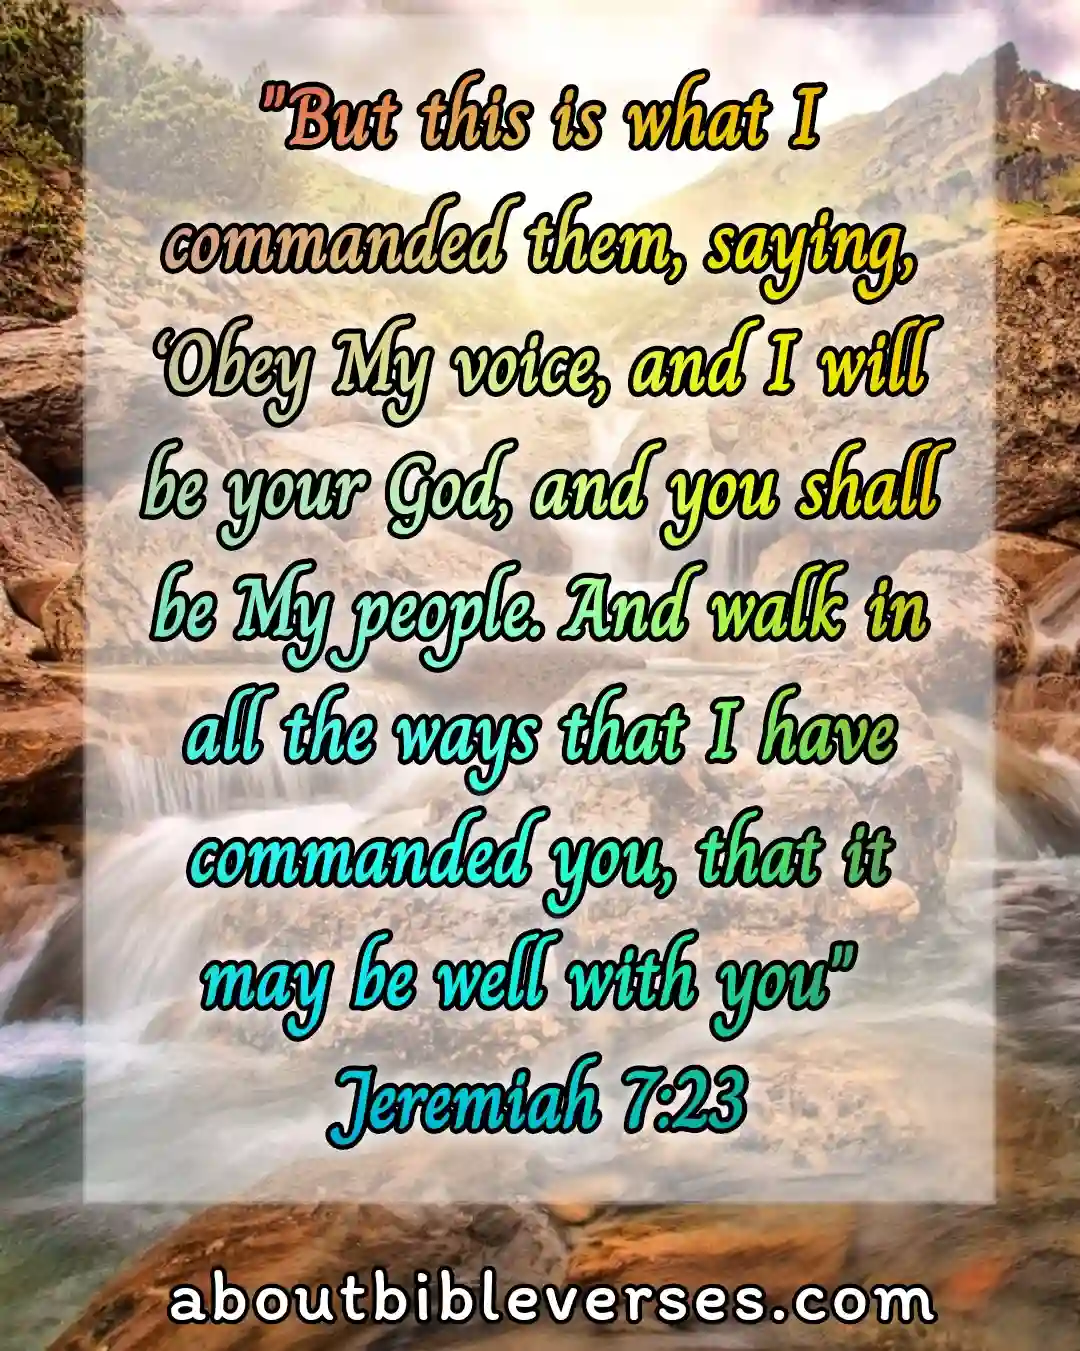 bible verses blessings from God (Jeremiah 7:23)